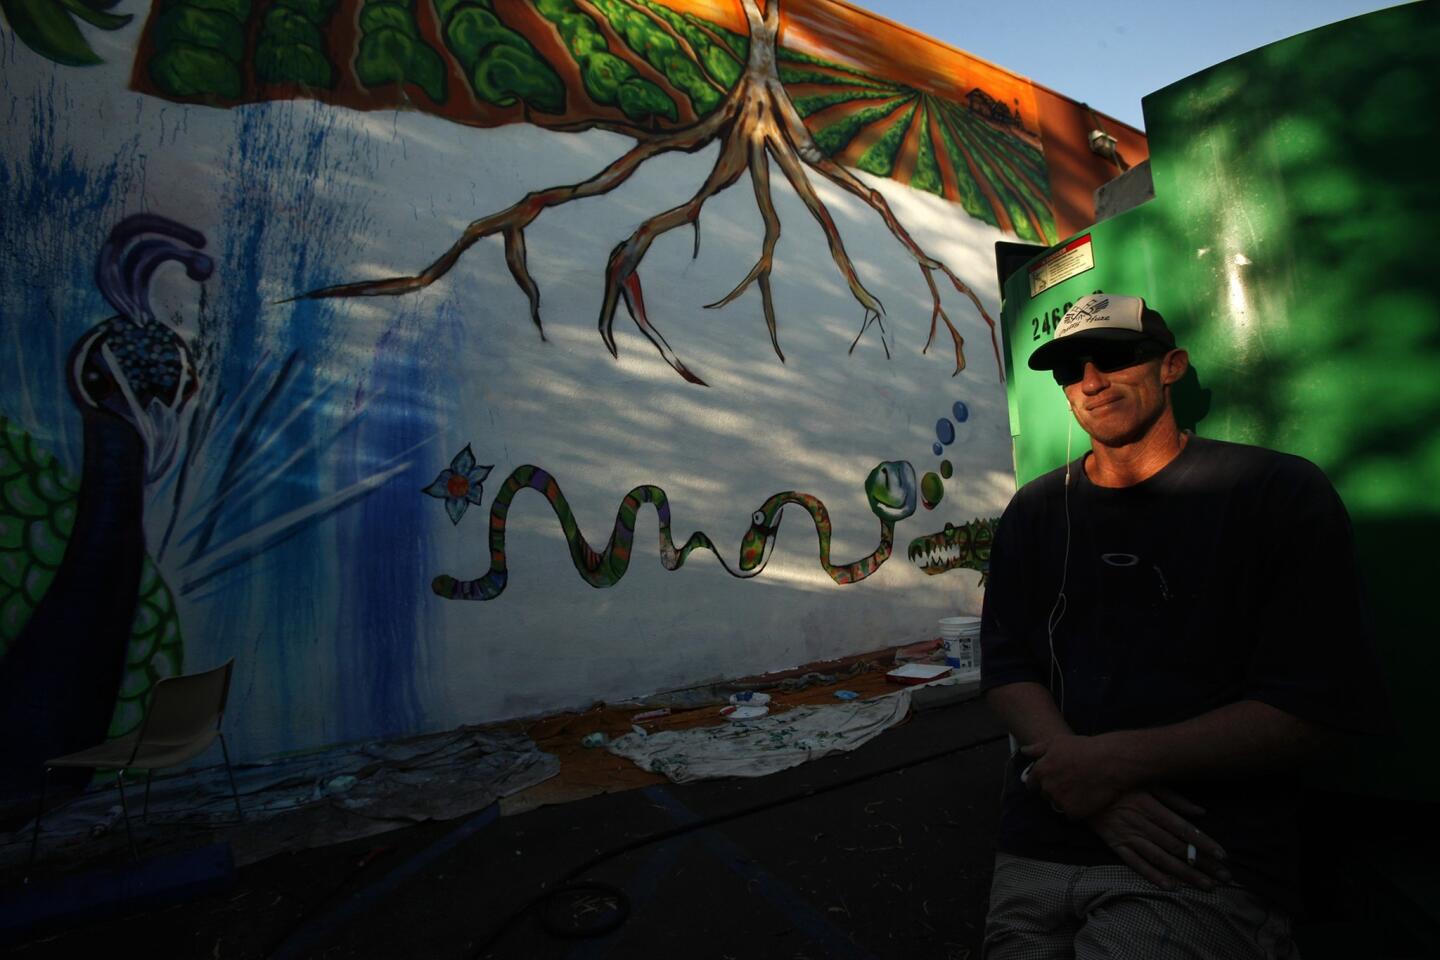 Former USC Trojan and Los Angeles Raider Todd Marinovich in 2014 in Garden Grove, where he was painting a mural on the side of the Gem Theater.